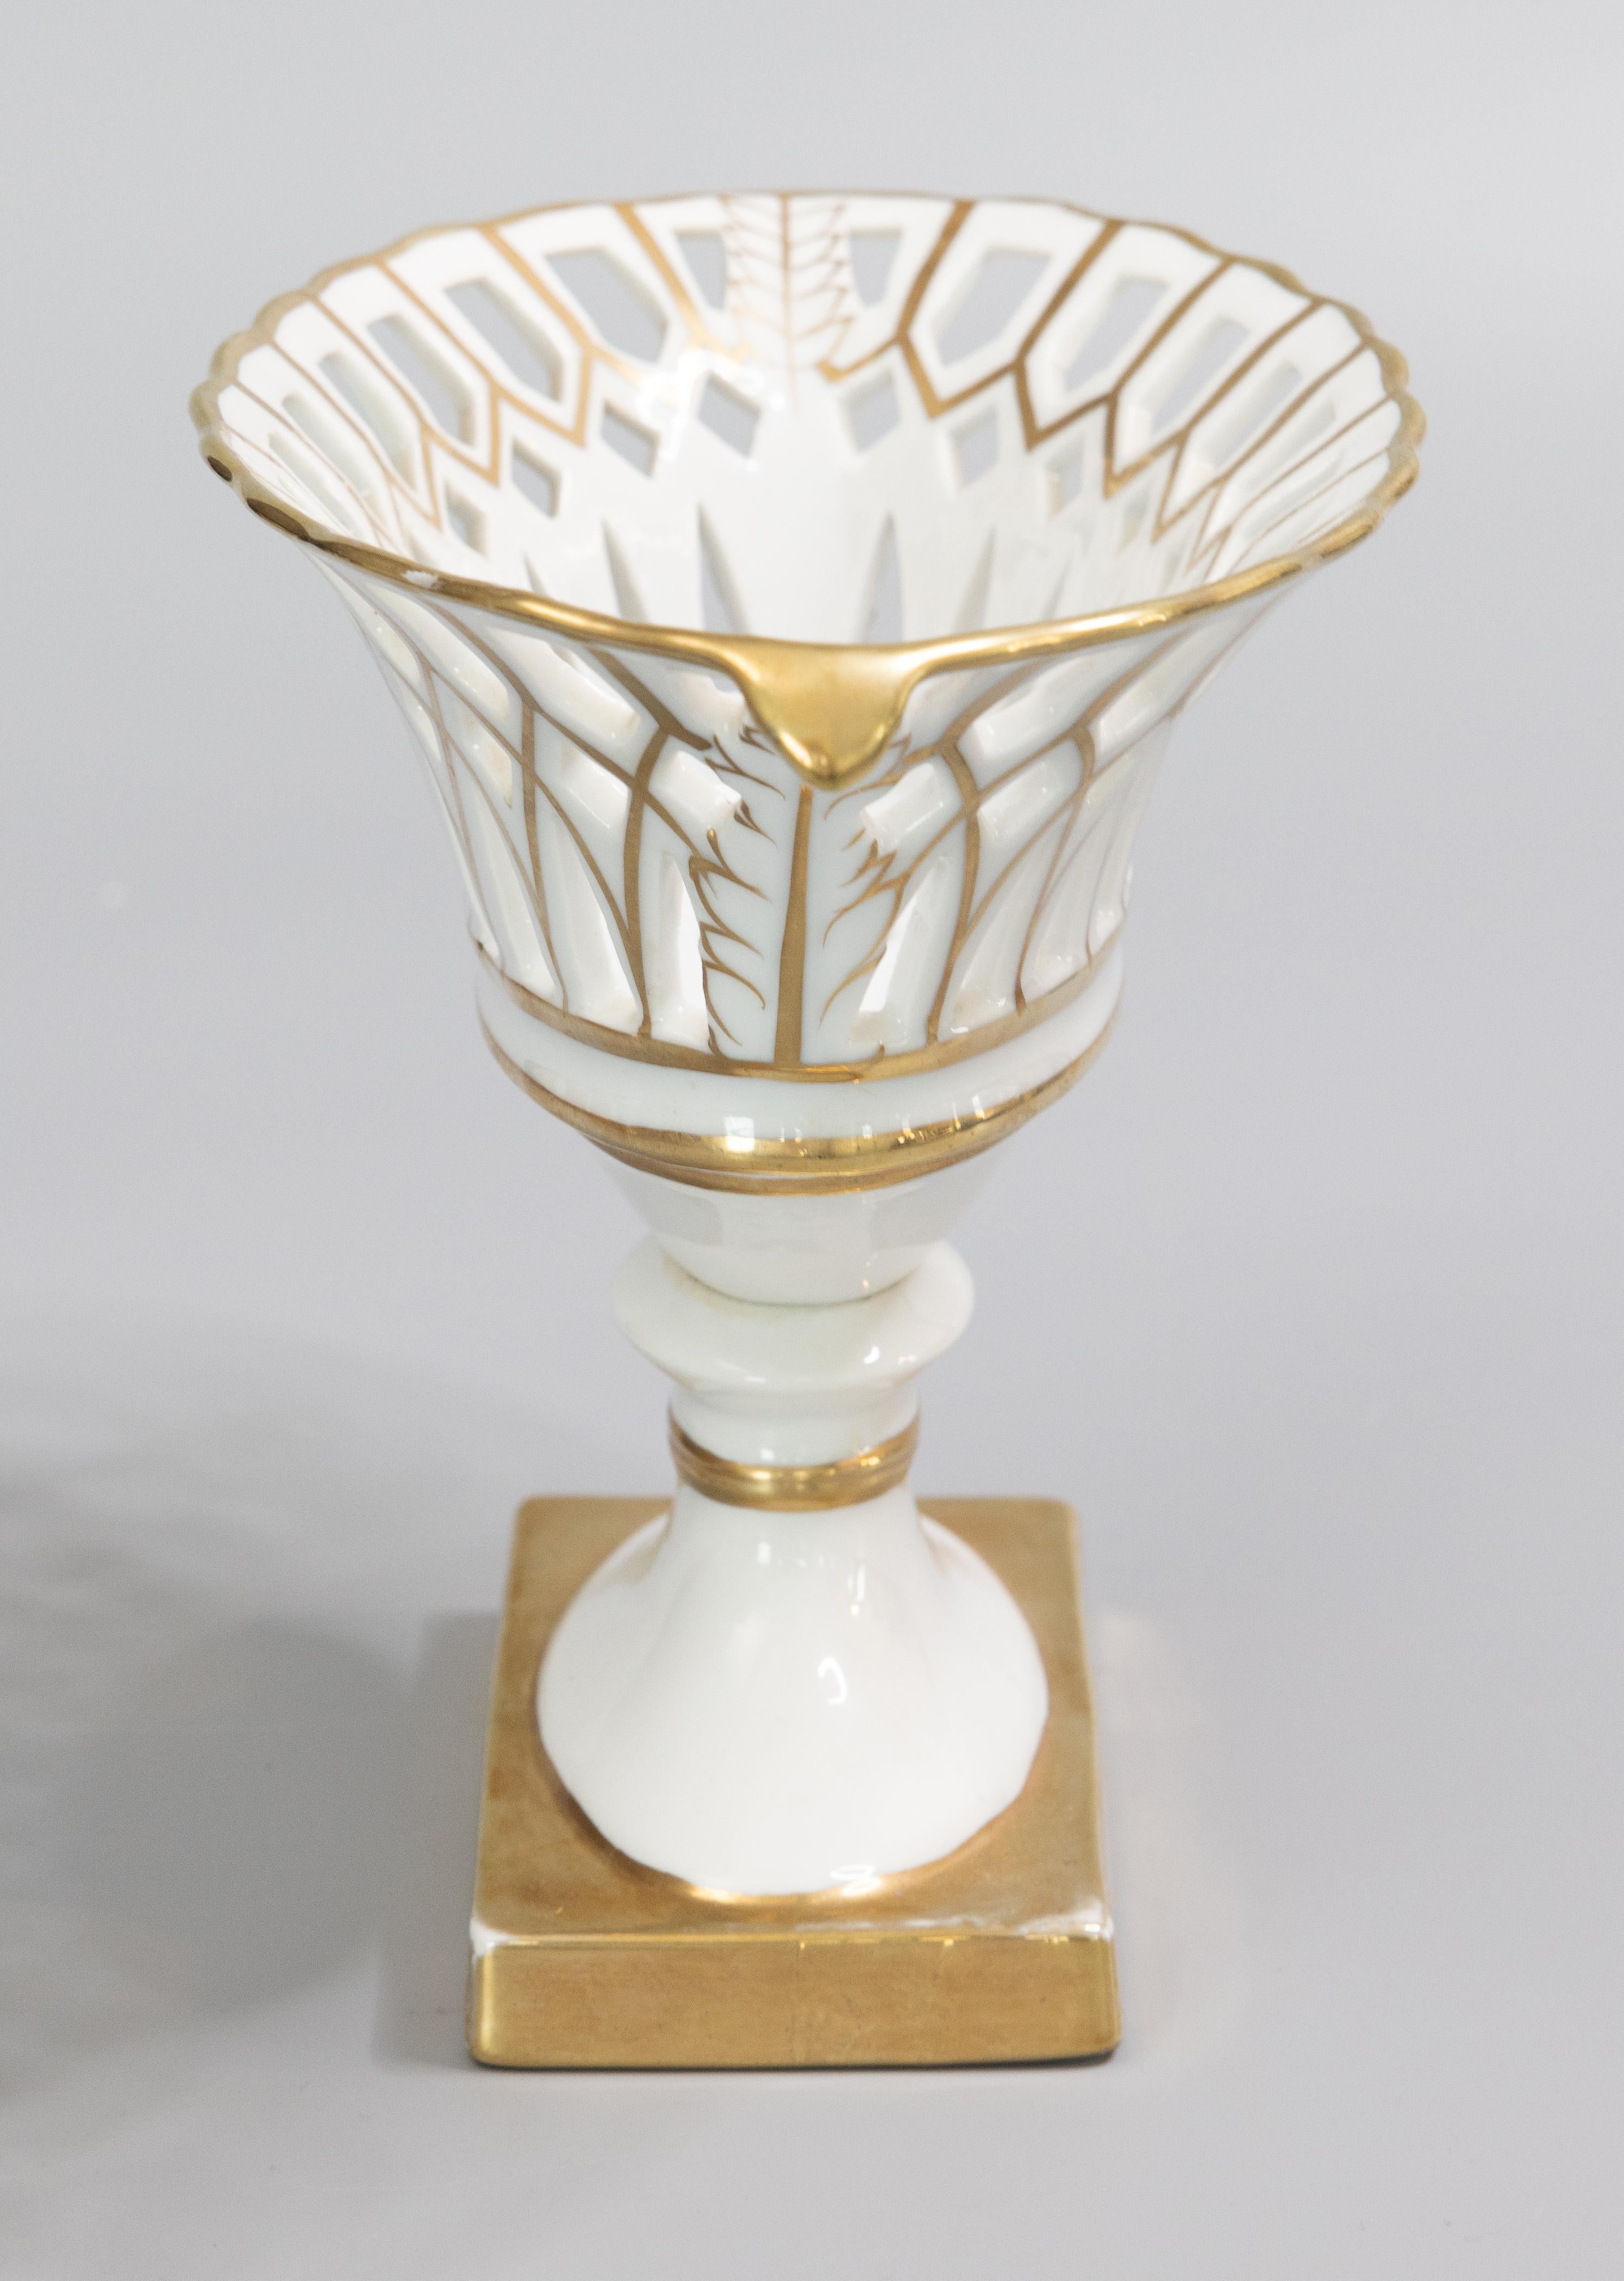 A gorgeous vintage French Old Paris style gilt porcelain basket compote, circa 1950. This elegant pedestal bowl has a lovely reticulated design with stunning gold accents and leaf details. It displays beautifully and would be the perfect accent